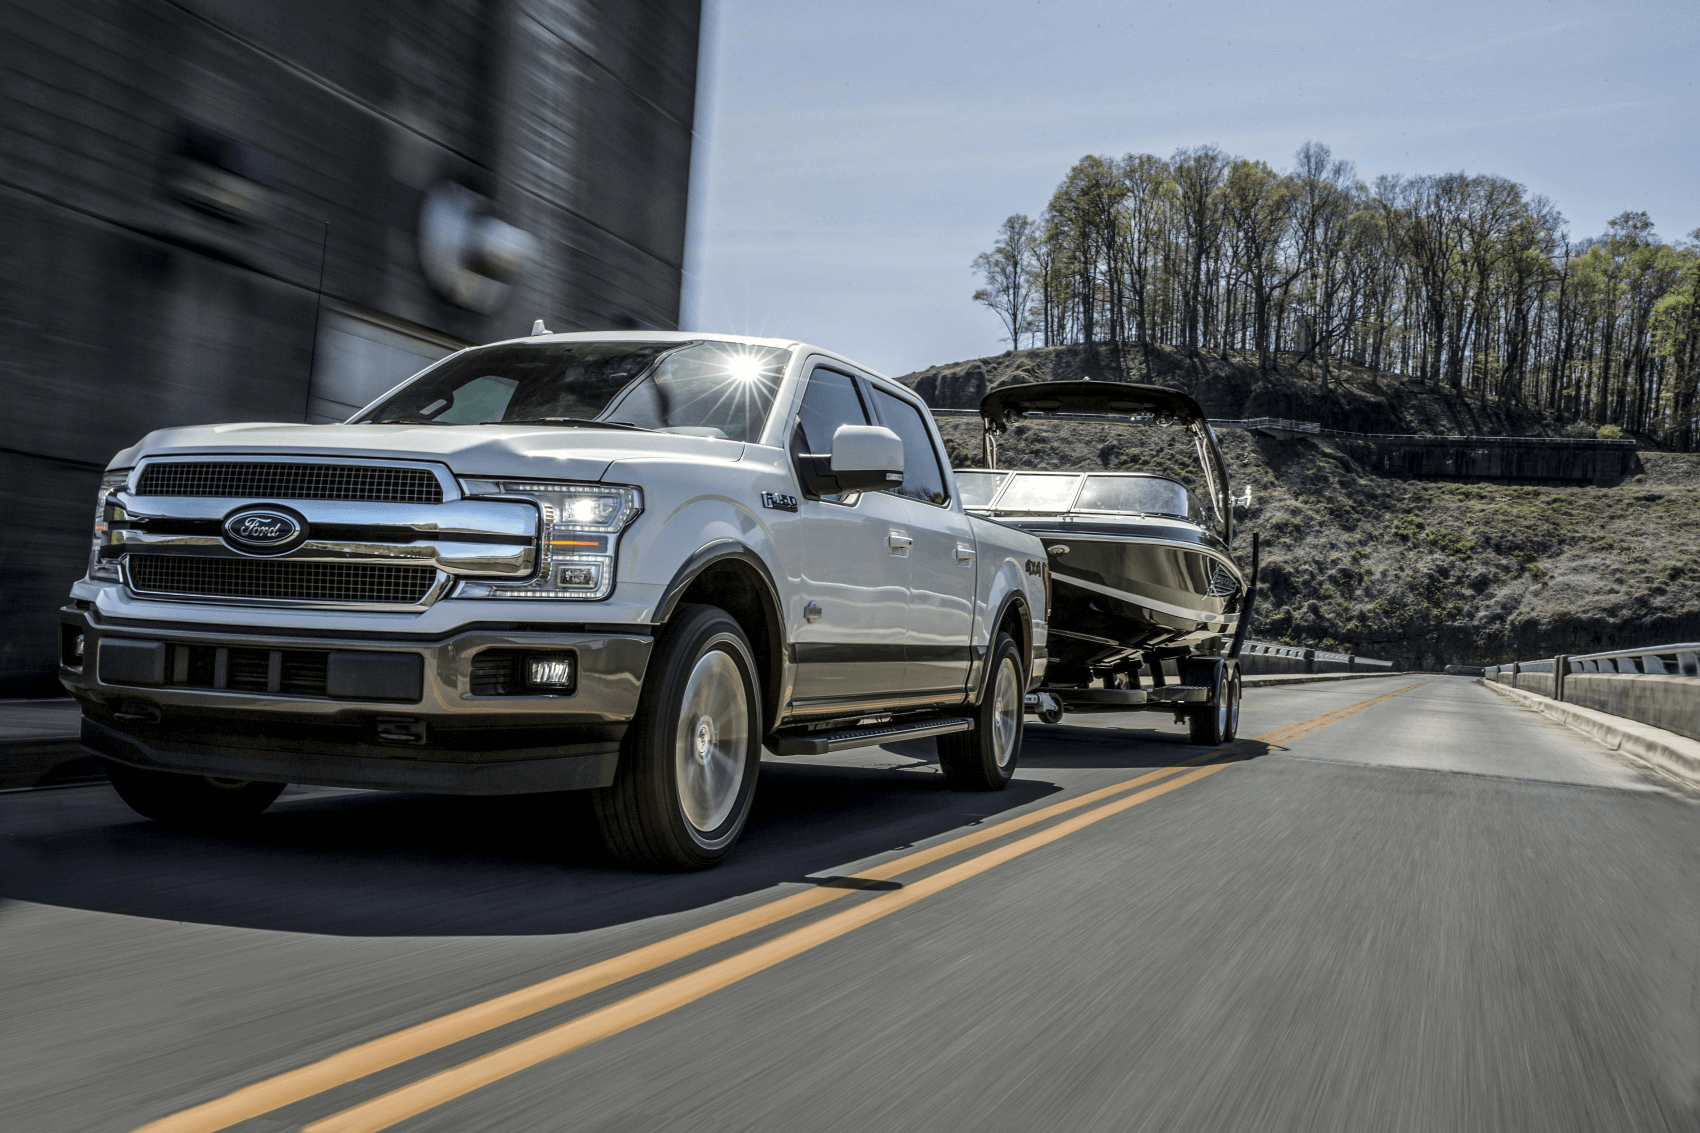 Used 2019 Ford F-150 Silver Towing Boat from Tunkhannock Ford near Lackawanna County, PA